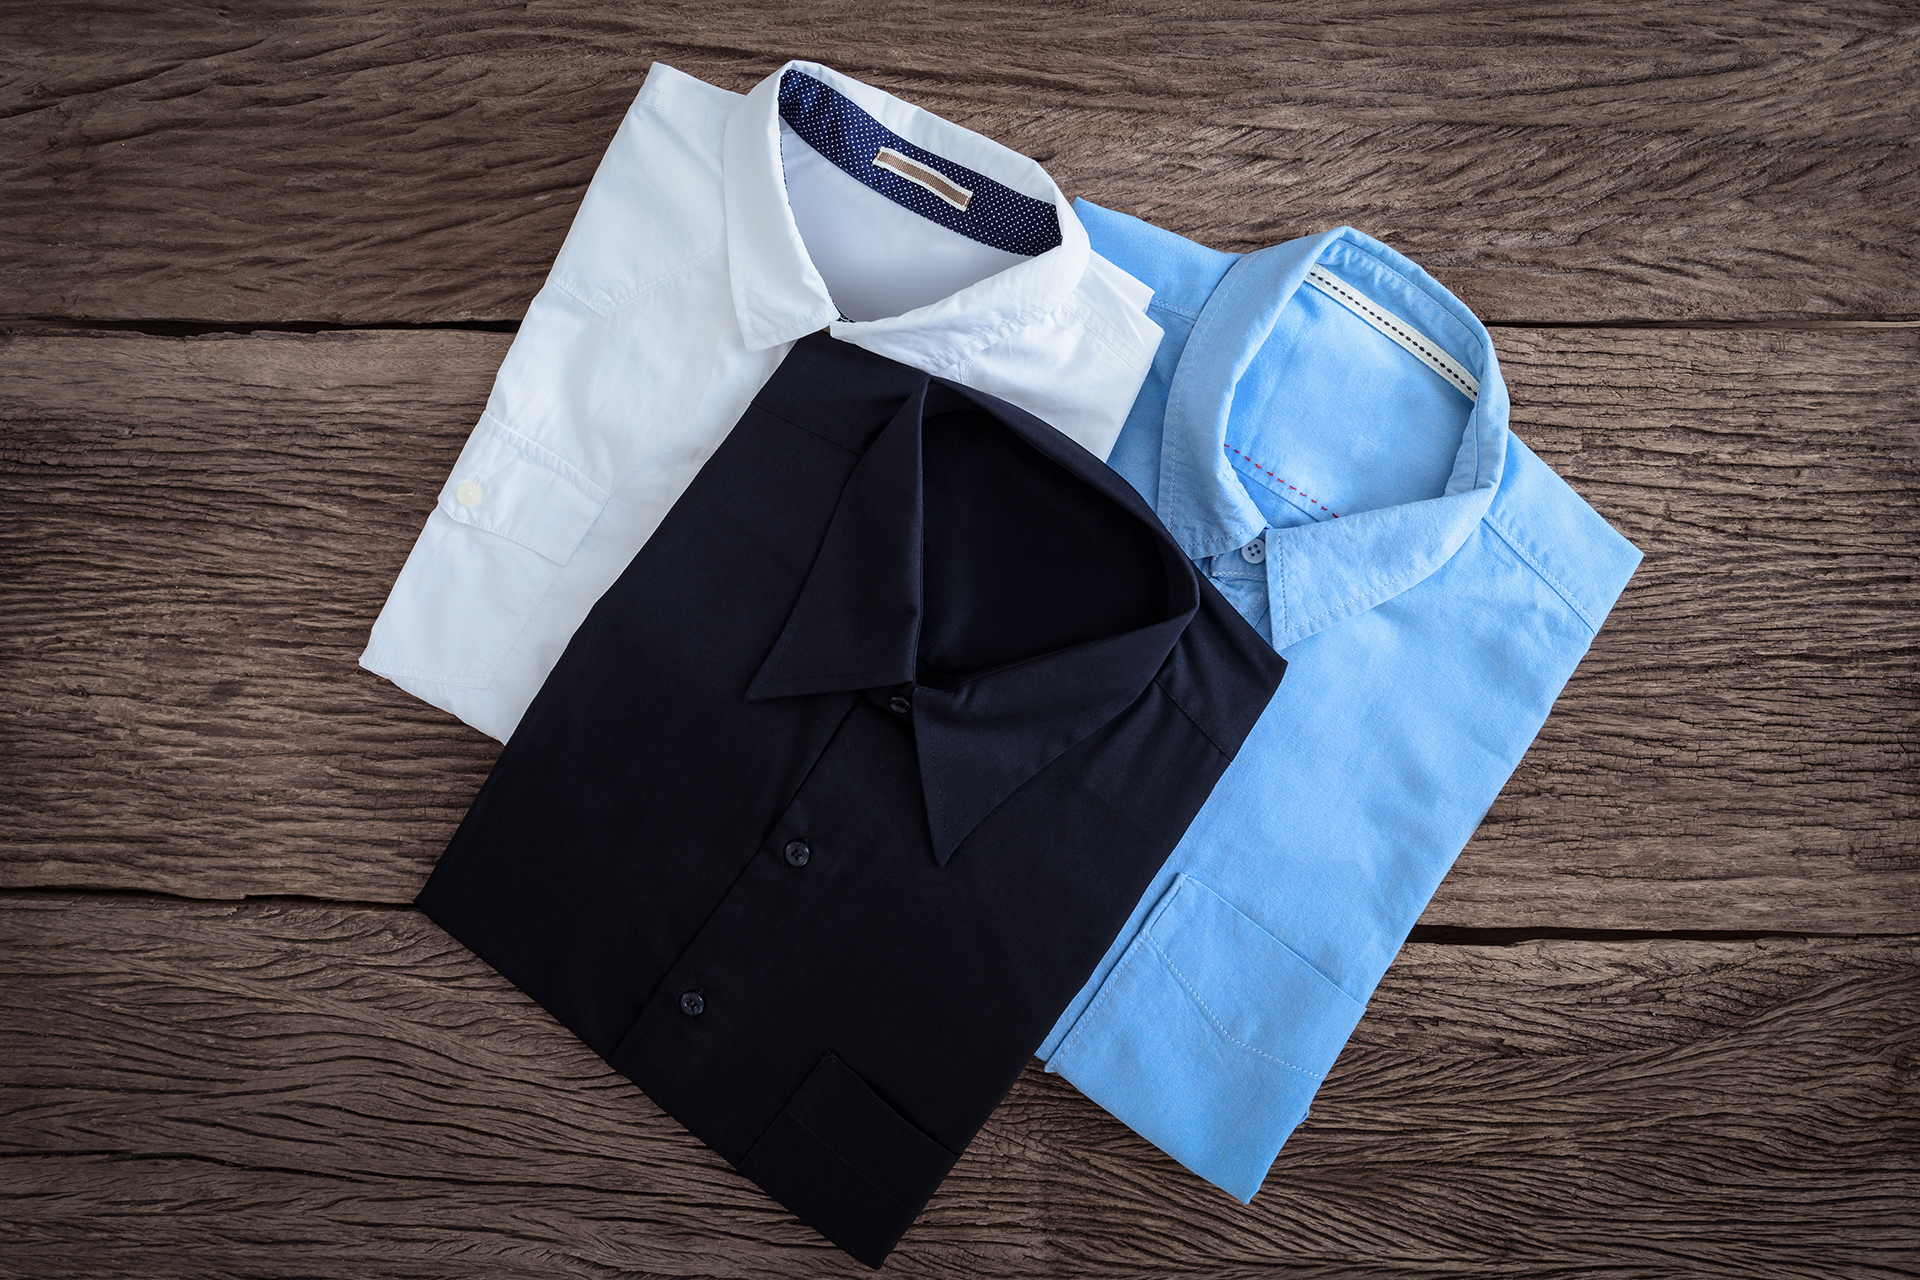 Dress shirt collar styles, the complete guide: from casual to